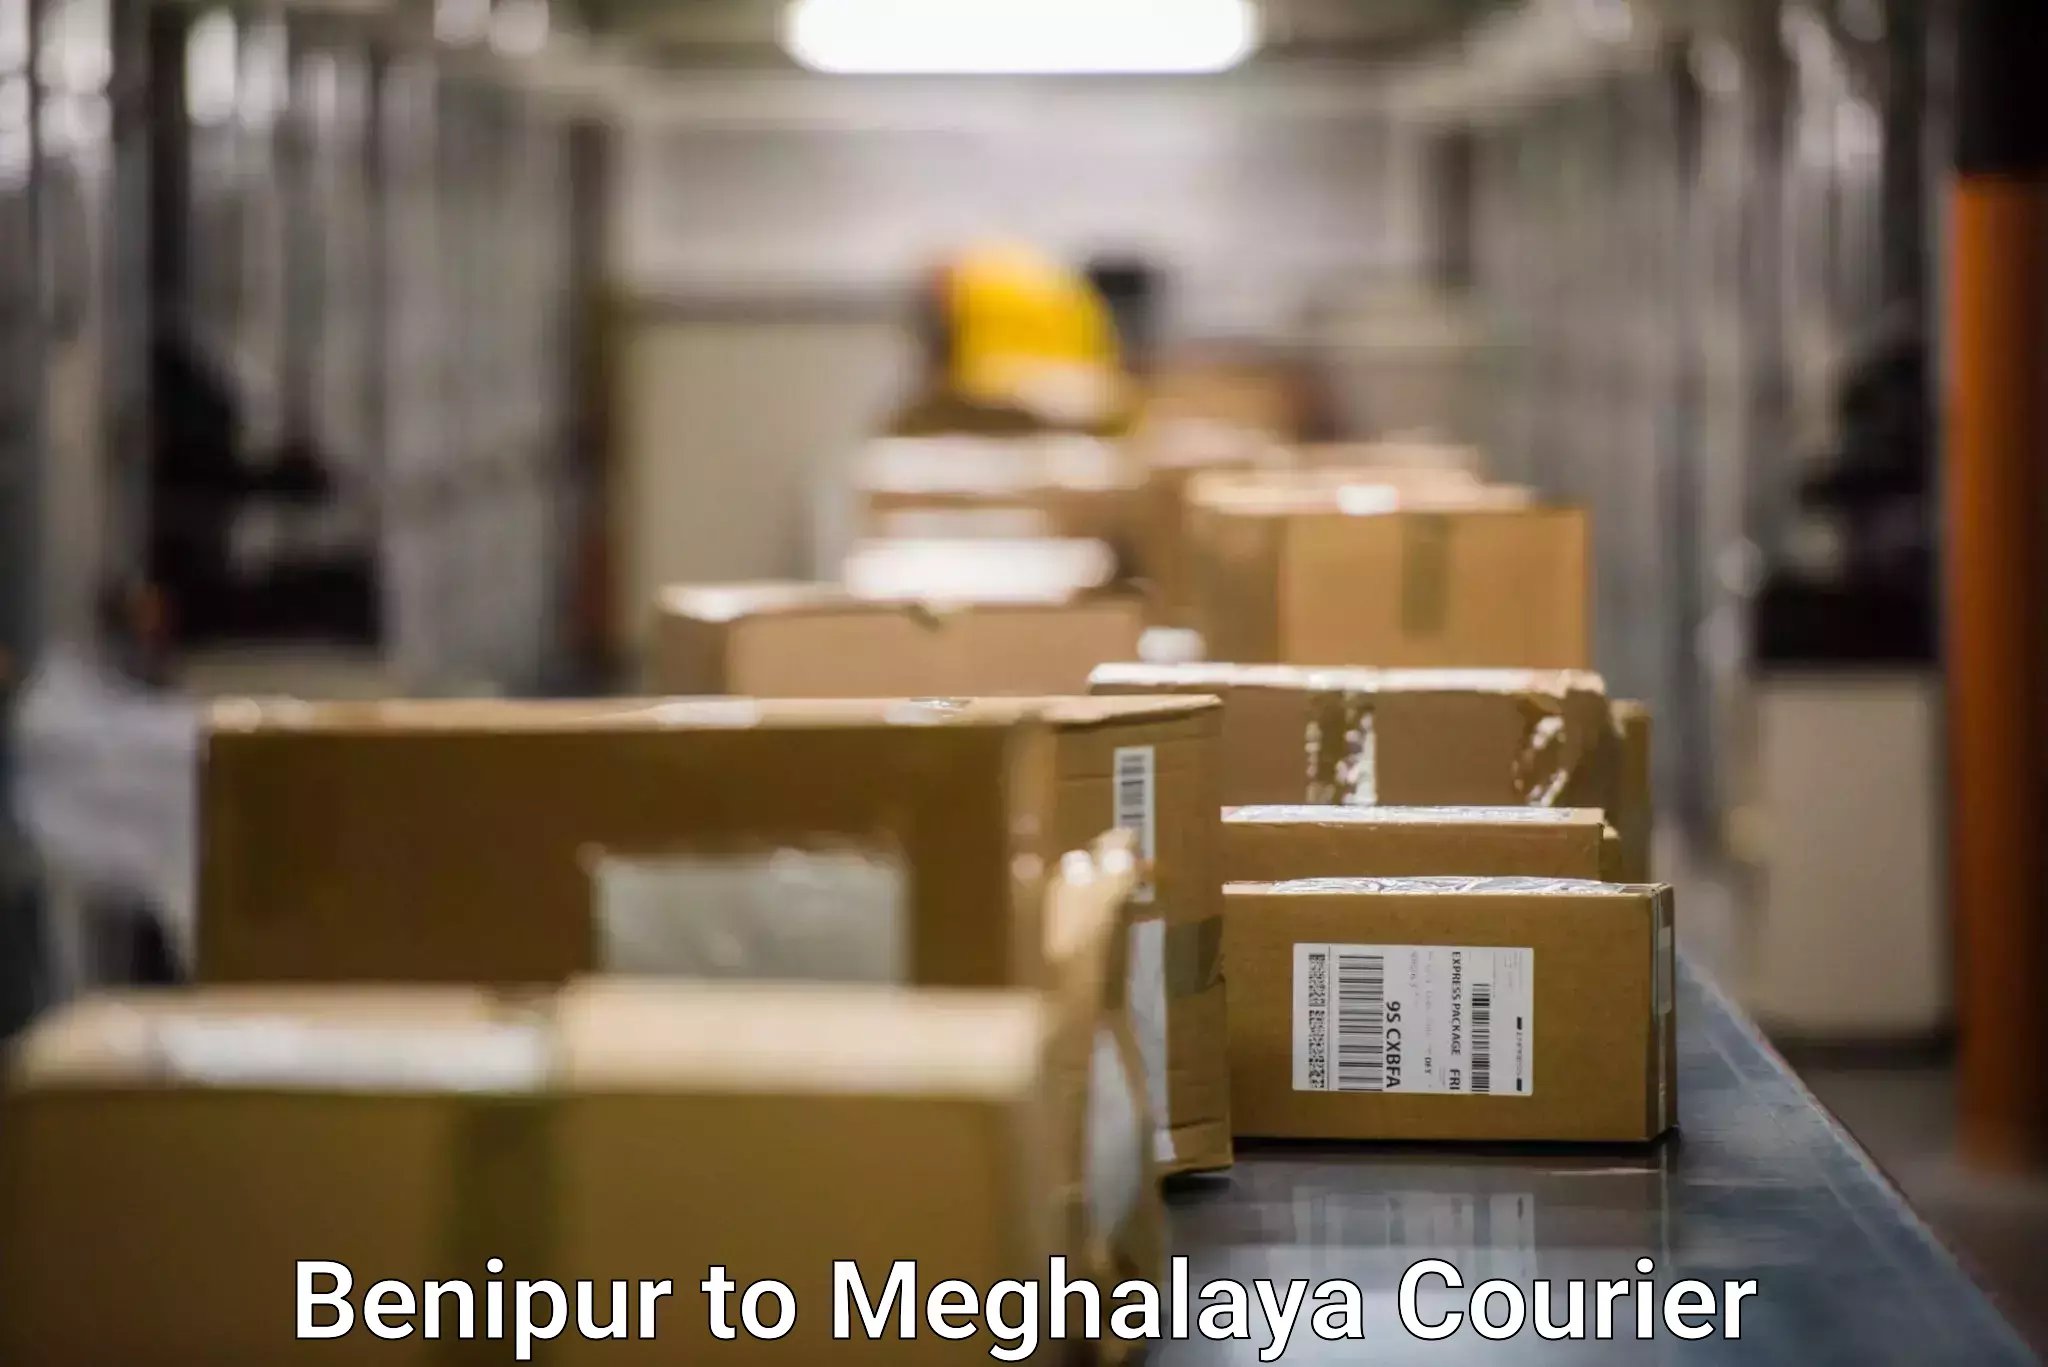 Courier service comparison Benipur to Umsaw